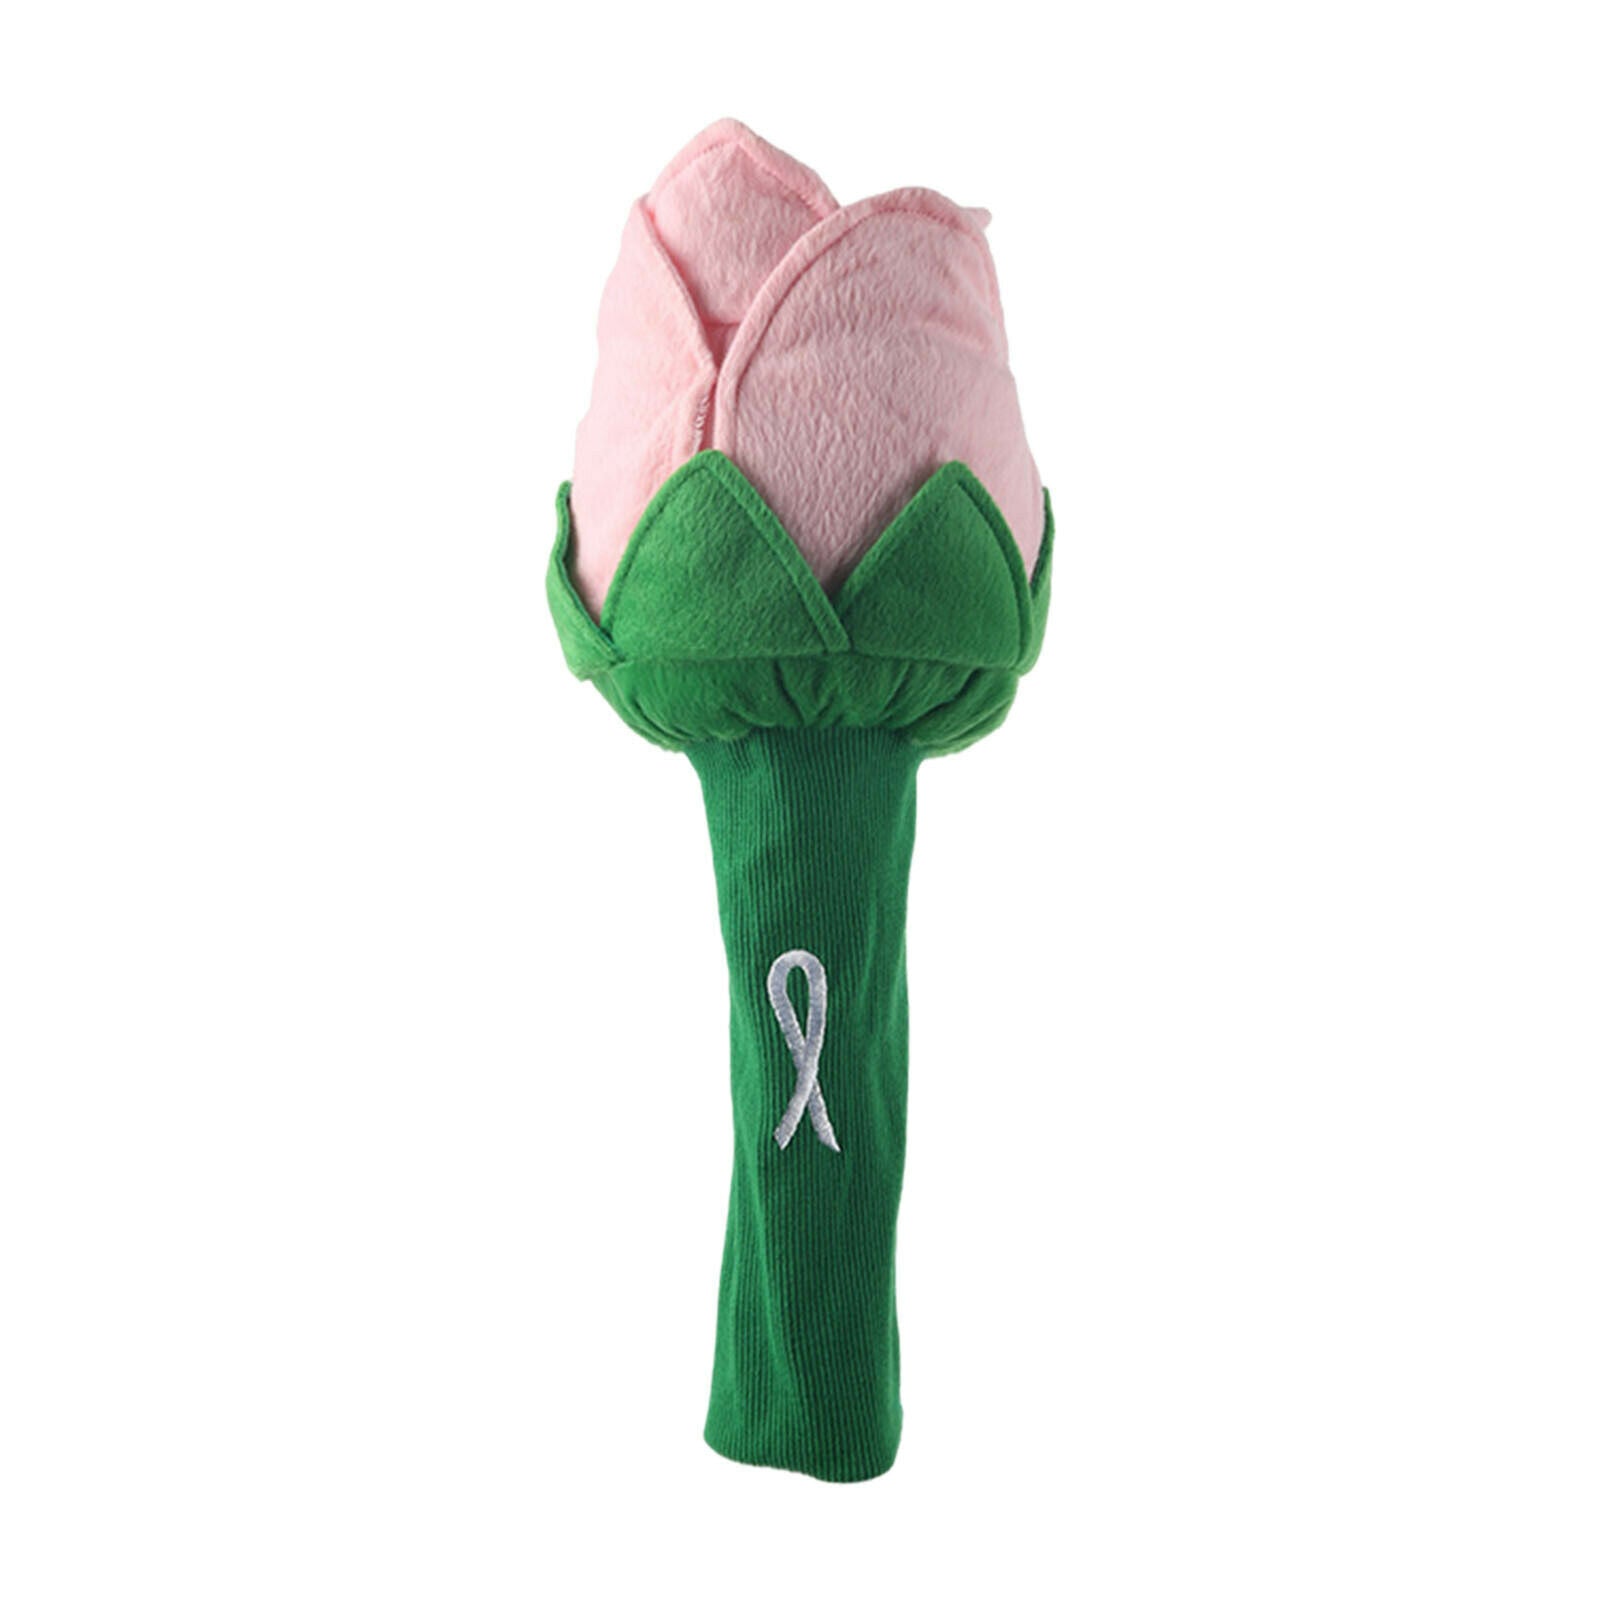 Soft Rose Flower Shaped Golf Driver Headcover Novelty Club Head Covers Guard